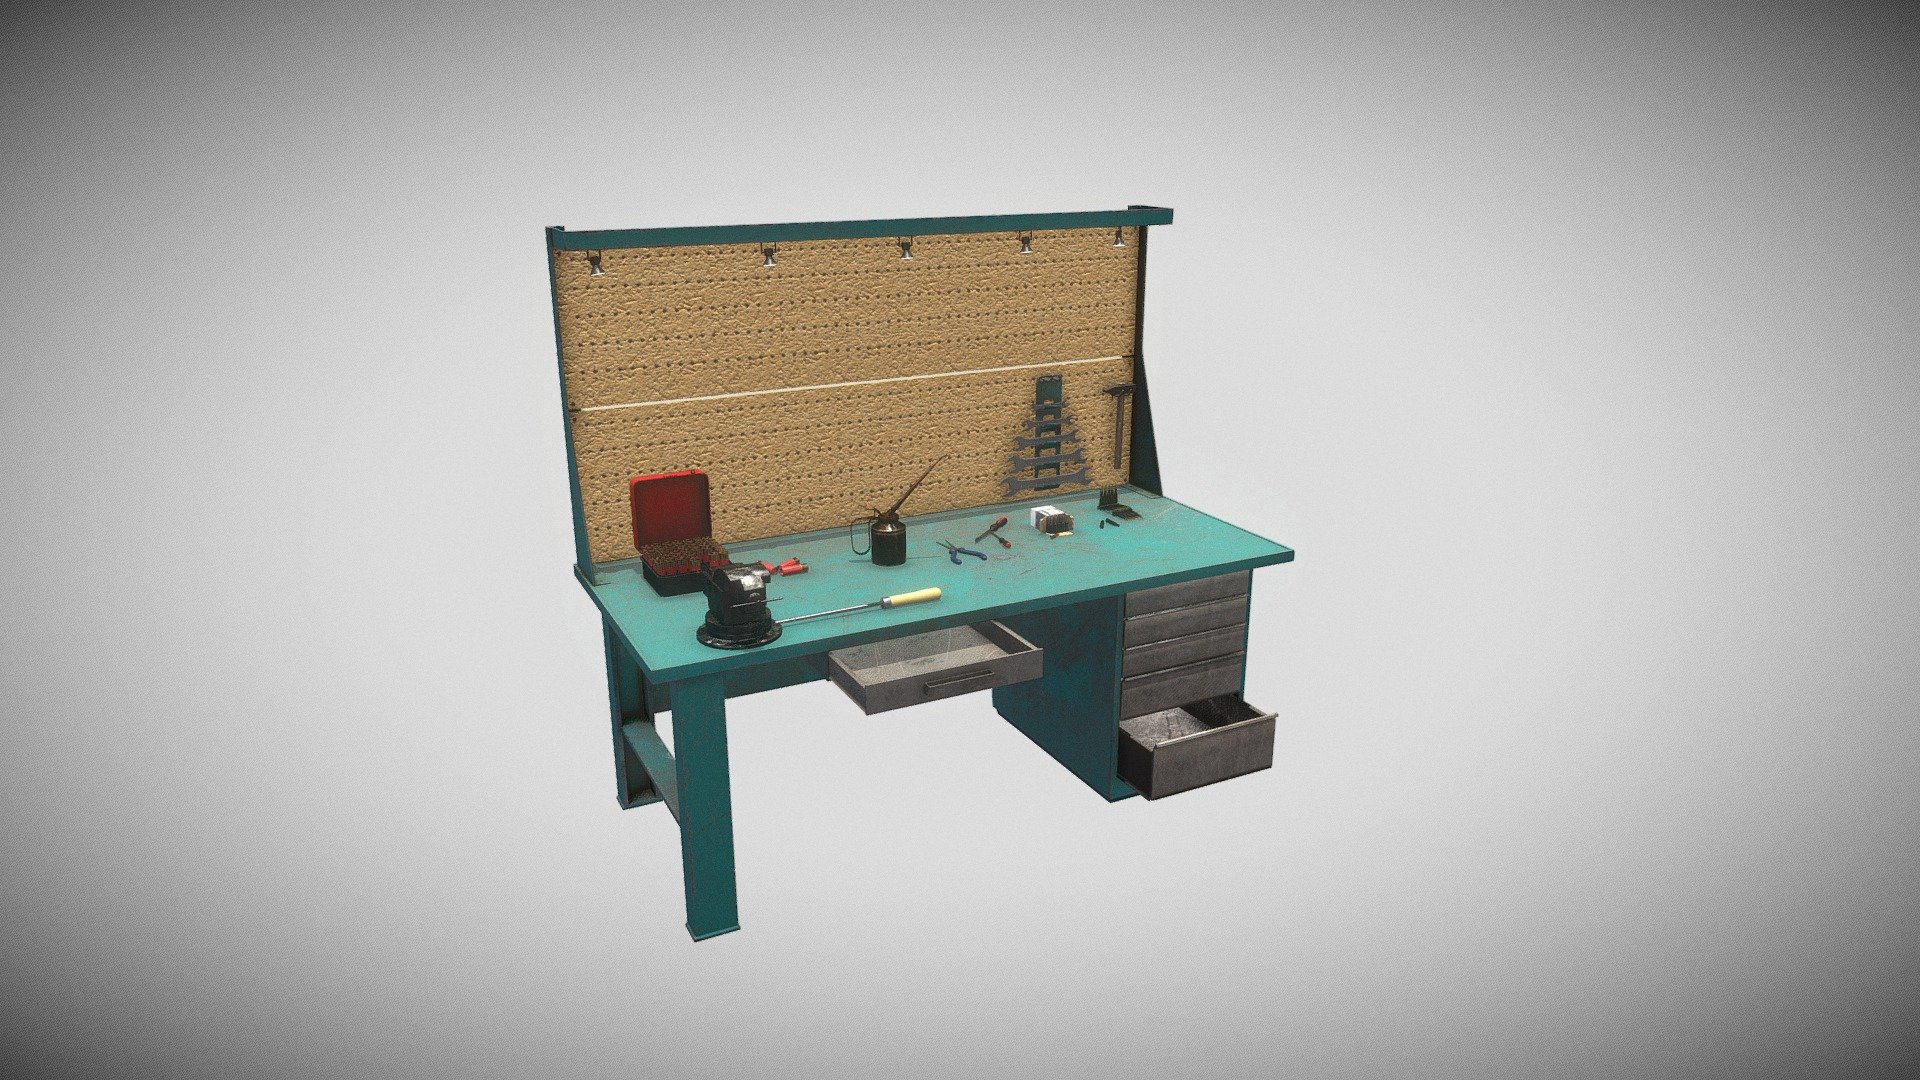 This is the Weapon workbench with tools 3d model, originally created in Blender. 

The tool kit includes:
1. Ammo box
2. Hammer
3. Wrench with stand
4. Oil container
5. Screwdriver
6. Pliers
7. Vice
8. Metal file
9. Packing for ammo, pistol ammo
10. Shotgun ammunition
11. Ammunition 7.62 with clip

Full PBR texture maps at 4K resolution:
   -Base color
   -Ambient Occlusion
   -Roughness
   -Metalness
   -Normal
   -Height
   -Emissive - Weapon workbench with tools - Buy Royalty Free 3D model by Korboleev Vitalii (@korboleevv) 3d model